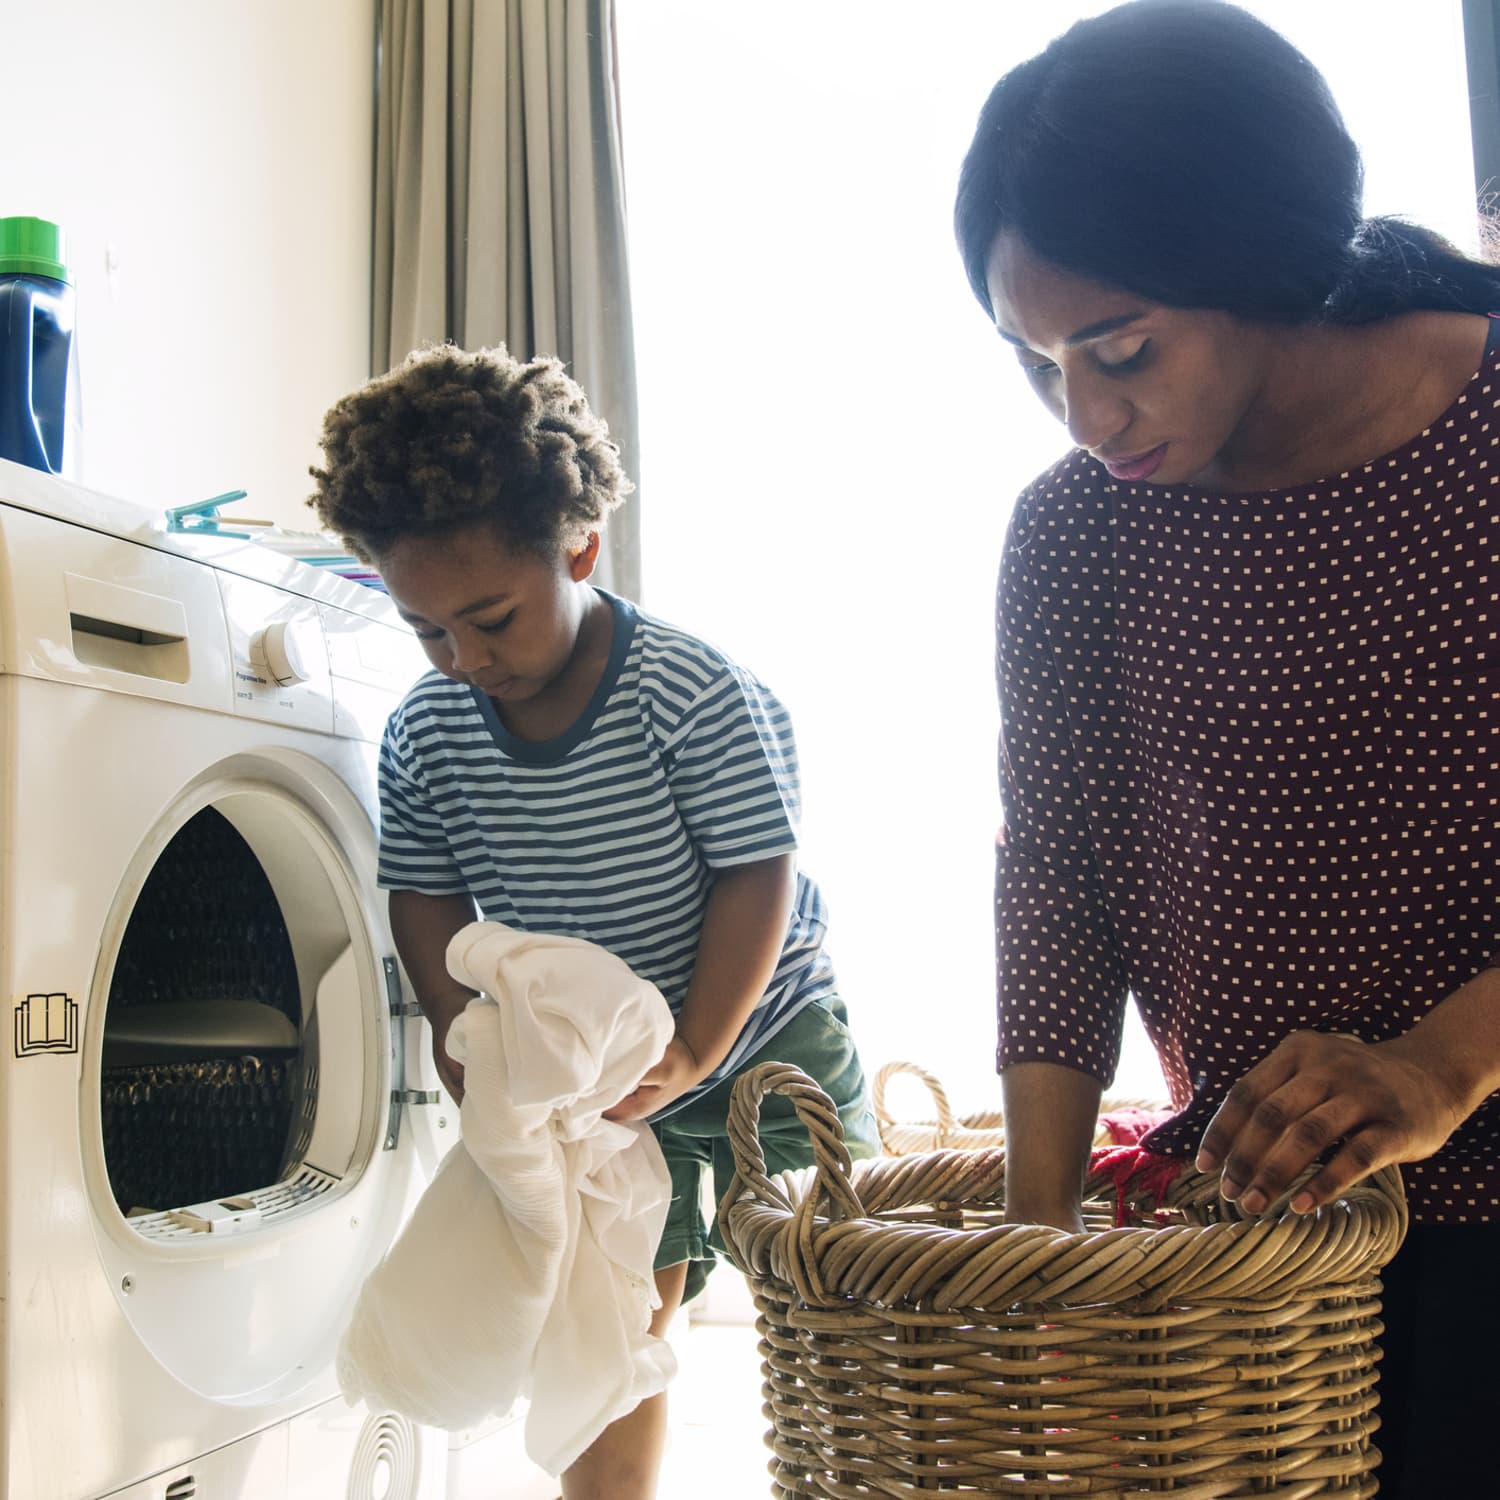 Portable washer and dryer • Compare best prices now »